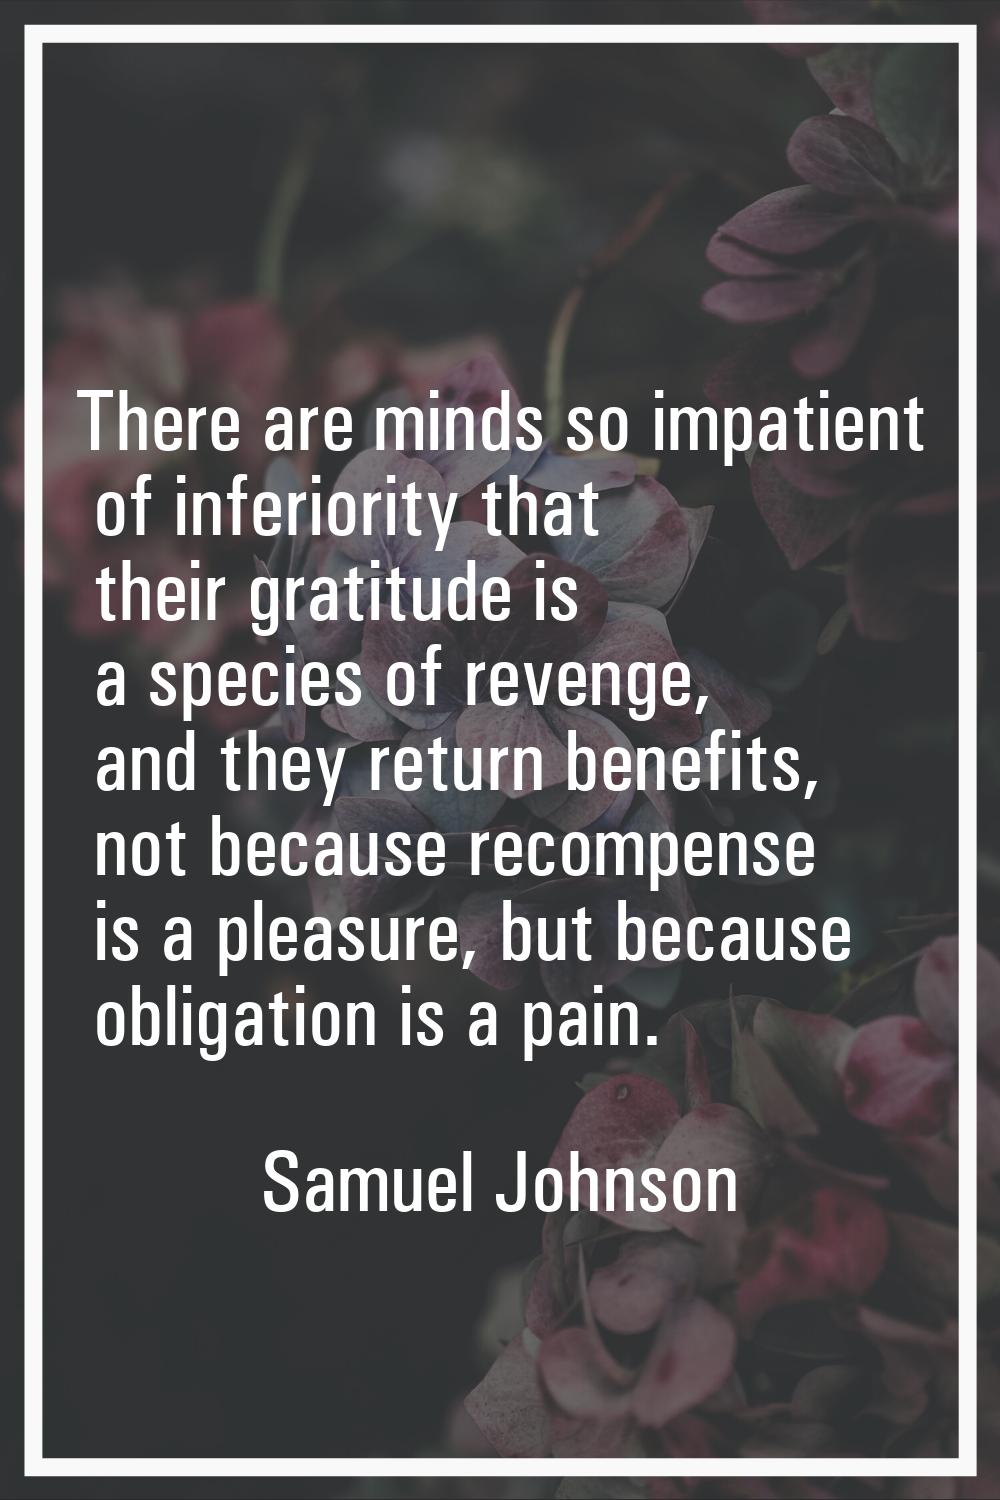 There are minds so impatient of inferiority that their gratitude is a species of revenge, and they 